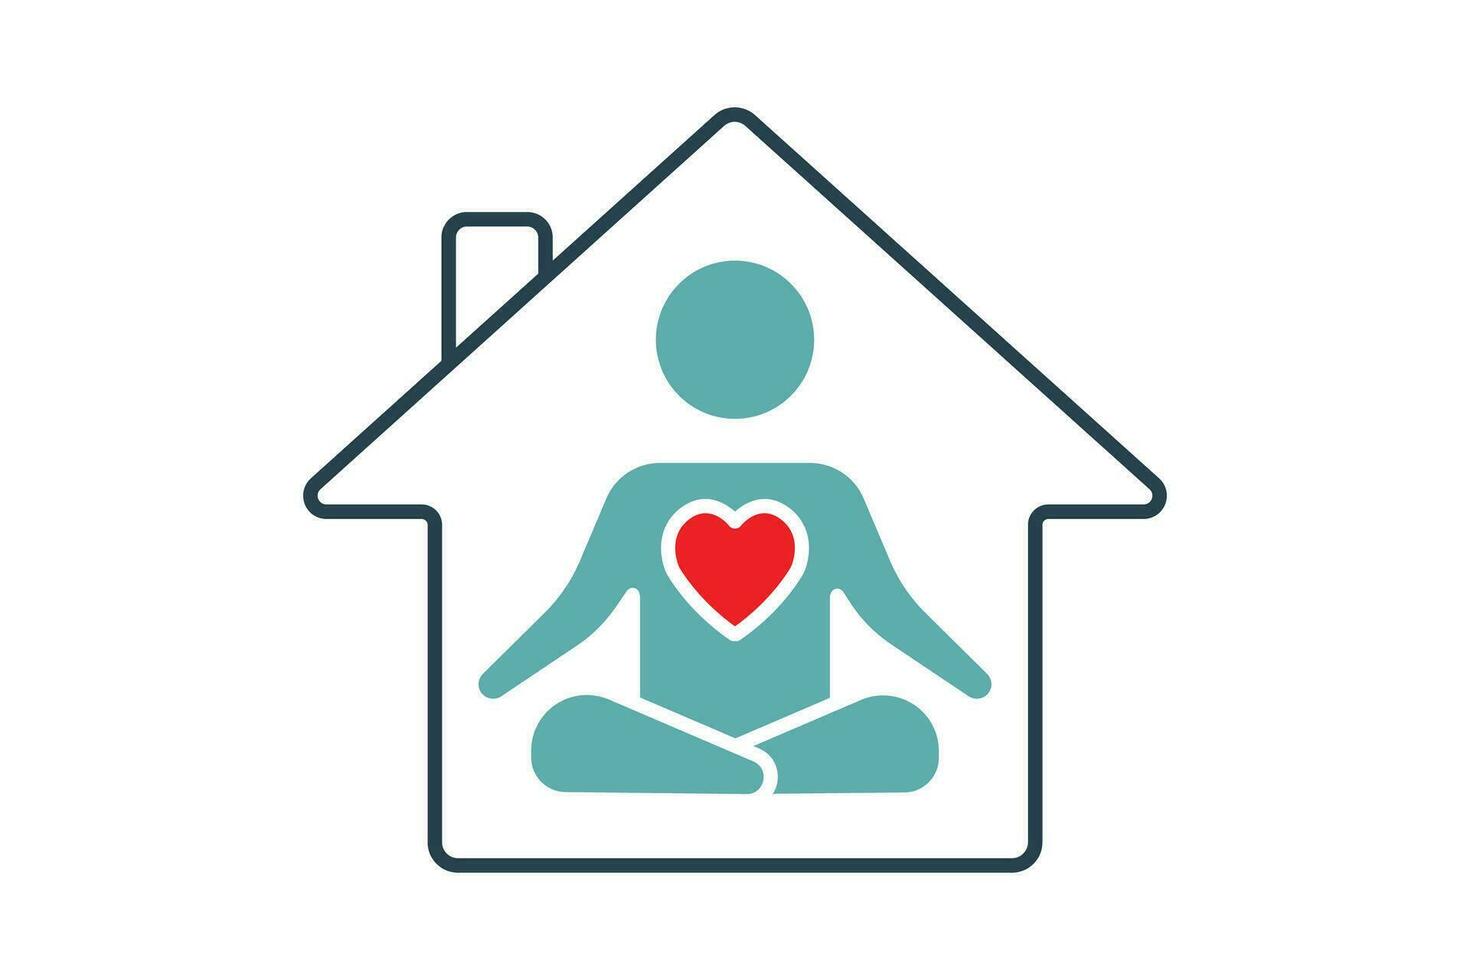 house icon with yoga. icon related to yoga studio, yoga, meditation, relaxation. Duo tone icon style design. Simple vector design editable